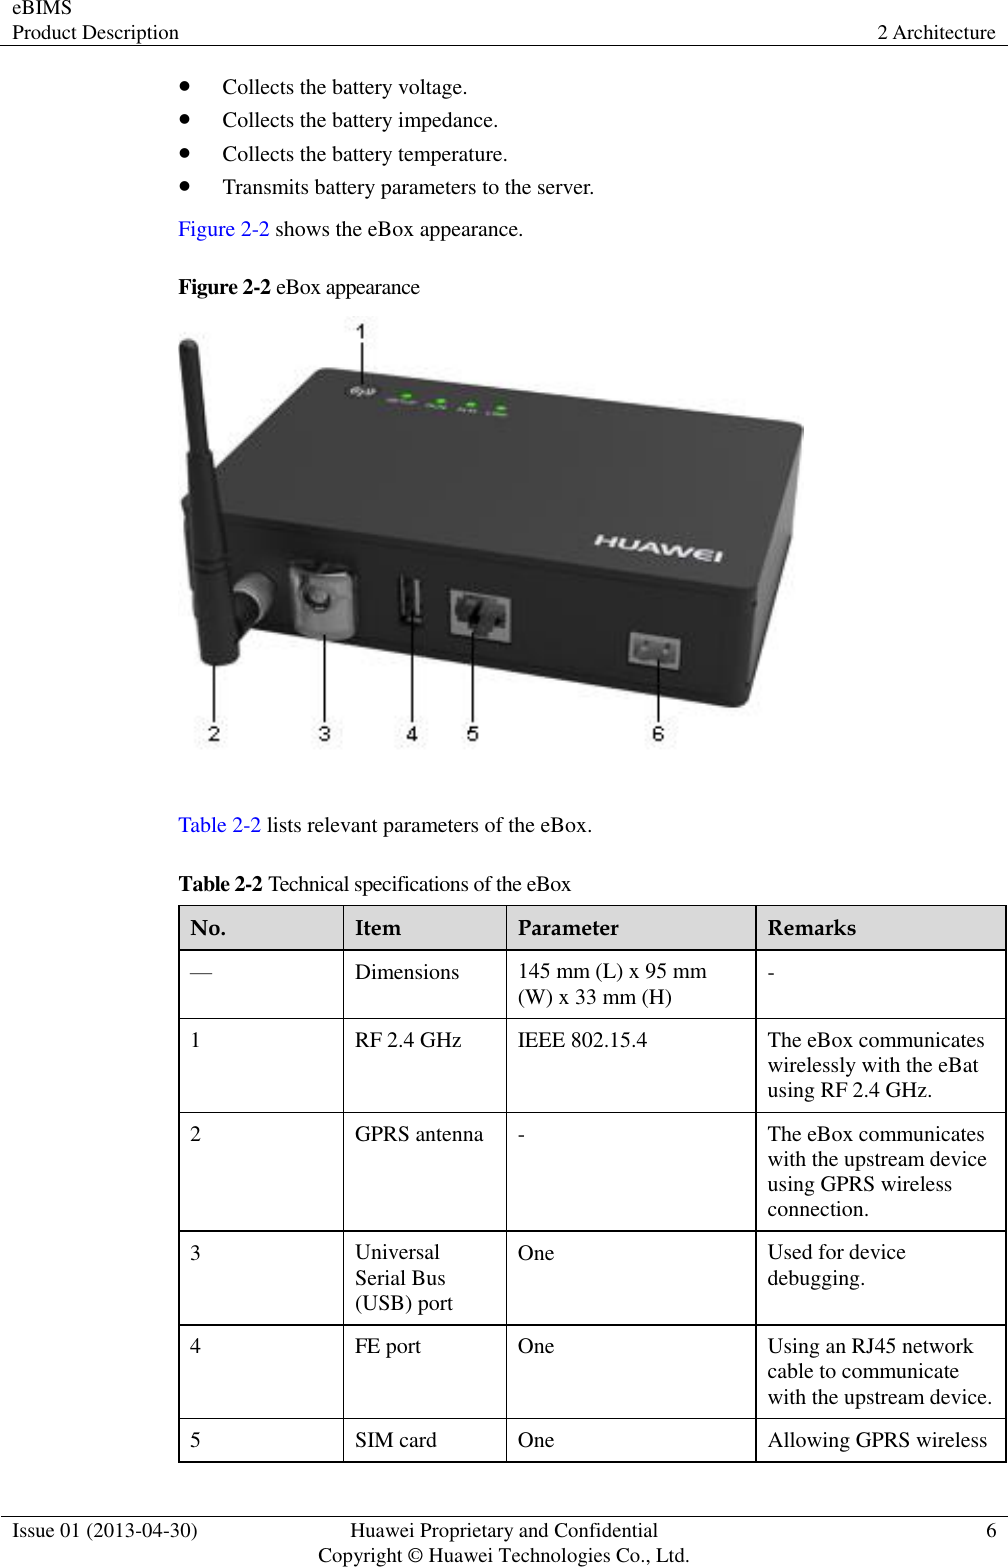 eBIMS Product Description 2 Architecture  Issue 01 (2013-04-30) Huawei Proprietary and Confidential                                     Copyright © Huawei Technologies Co., Ltd. 6   Collects the battery voltage.  Collects the battery impedance.  Collects the battery temperature.  Transmits battery parameters to the server. Figure 2-2 shows the eBox appearance. Figure 2-2 eBox appearance   Table 2-2 lists relevant parameters of the eBox. Table 2-2 Technical specifications of the eBox No. Item Parameter Remarks — Dimensions 145 mm (L) x 95 mm (W) x 33 mm (H) - 1 RF 2.4 GHz IEEE 802.15.4 The eBox communicates wirelessly with the eBat using RF 2.4 GHz. 2 GPRS antenna - The eBox communicates with the upstream device using GPRS wireless connection. 3 Universal Serial Bus (USB) port One Used for device debugging. 4 FE port One Using an RJ45 network cable to communicate with the upstream device. 5 SIM card One Allowing GPRS wireless 